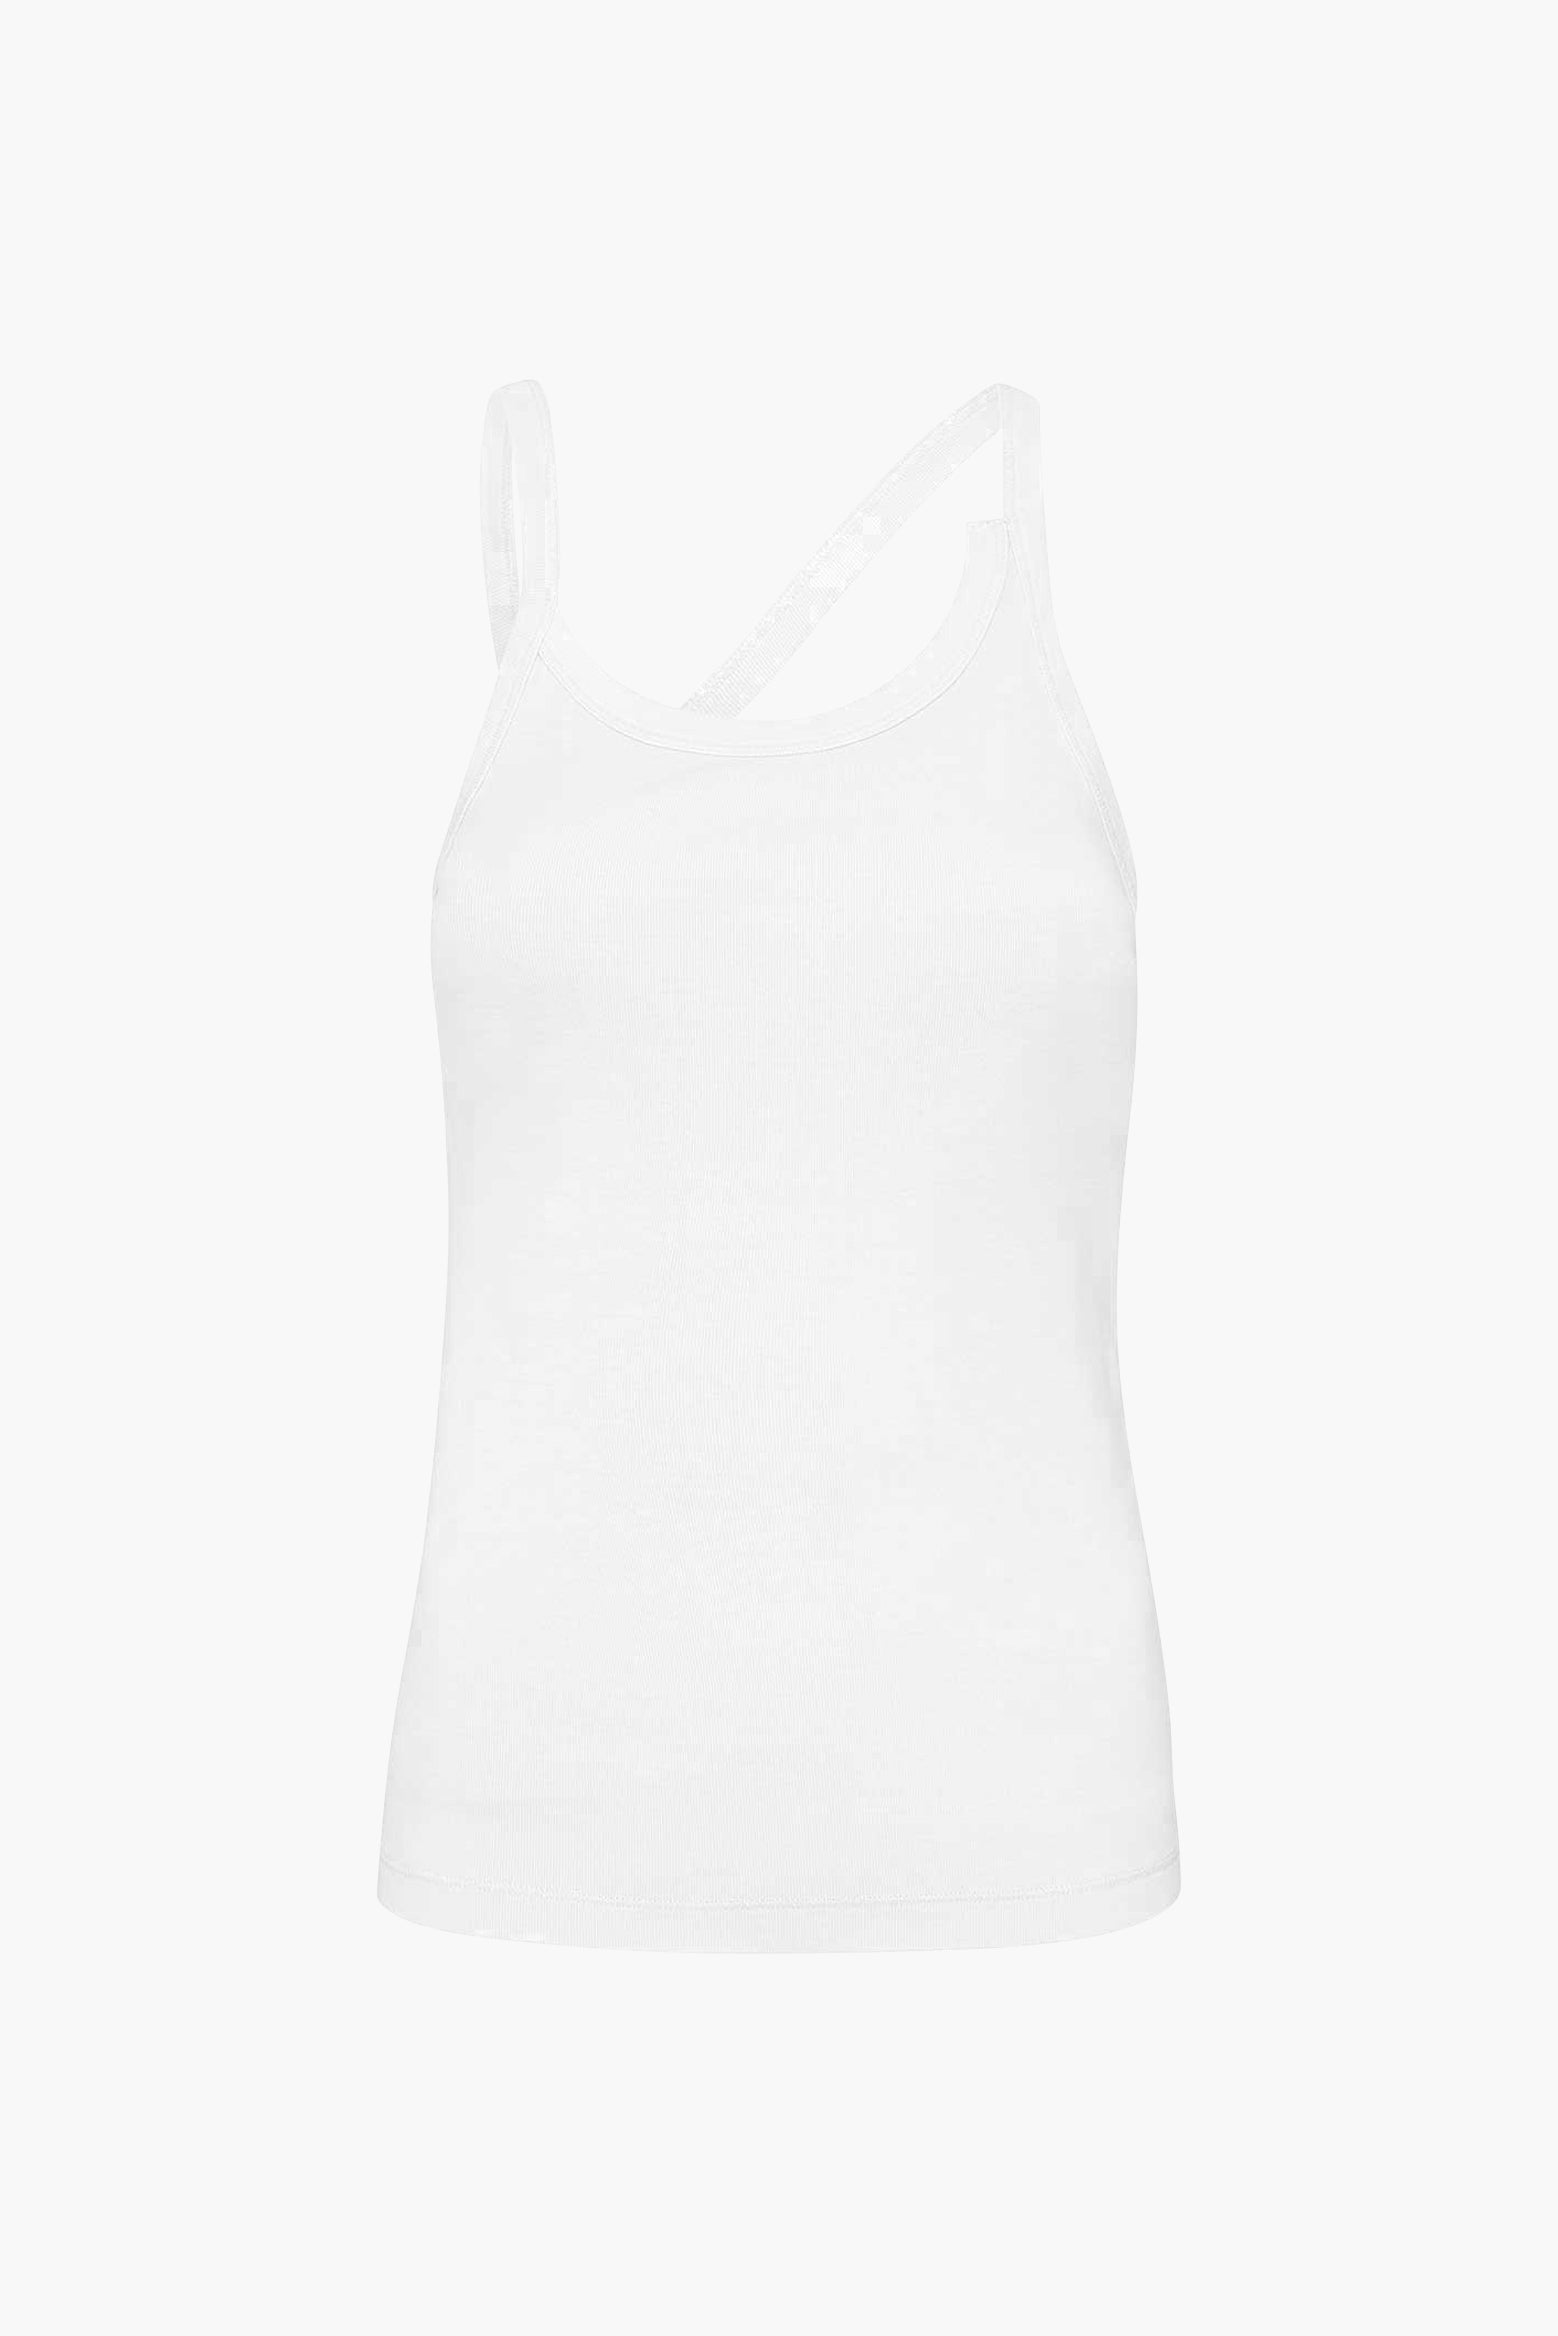 St Agni Organic Cotton Abstract Singlet in White available at TNT The New Trend Australia